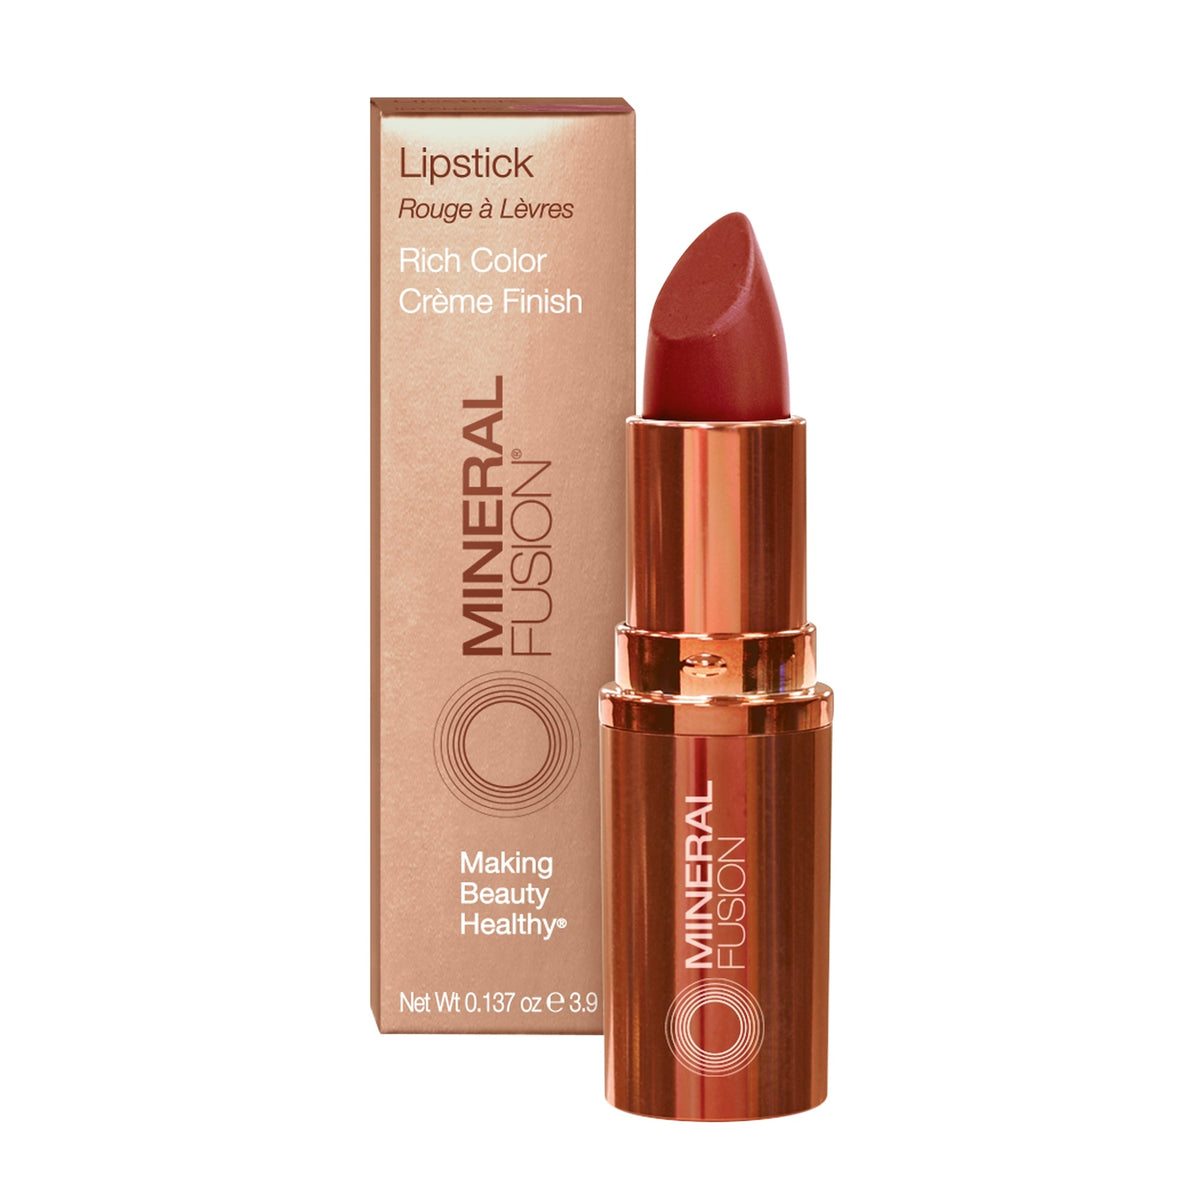 Mineral Fusion - Lipstick - Flashy - orange-red / .137 oz - ProCare Outlet by Mineral Fusion